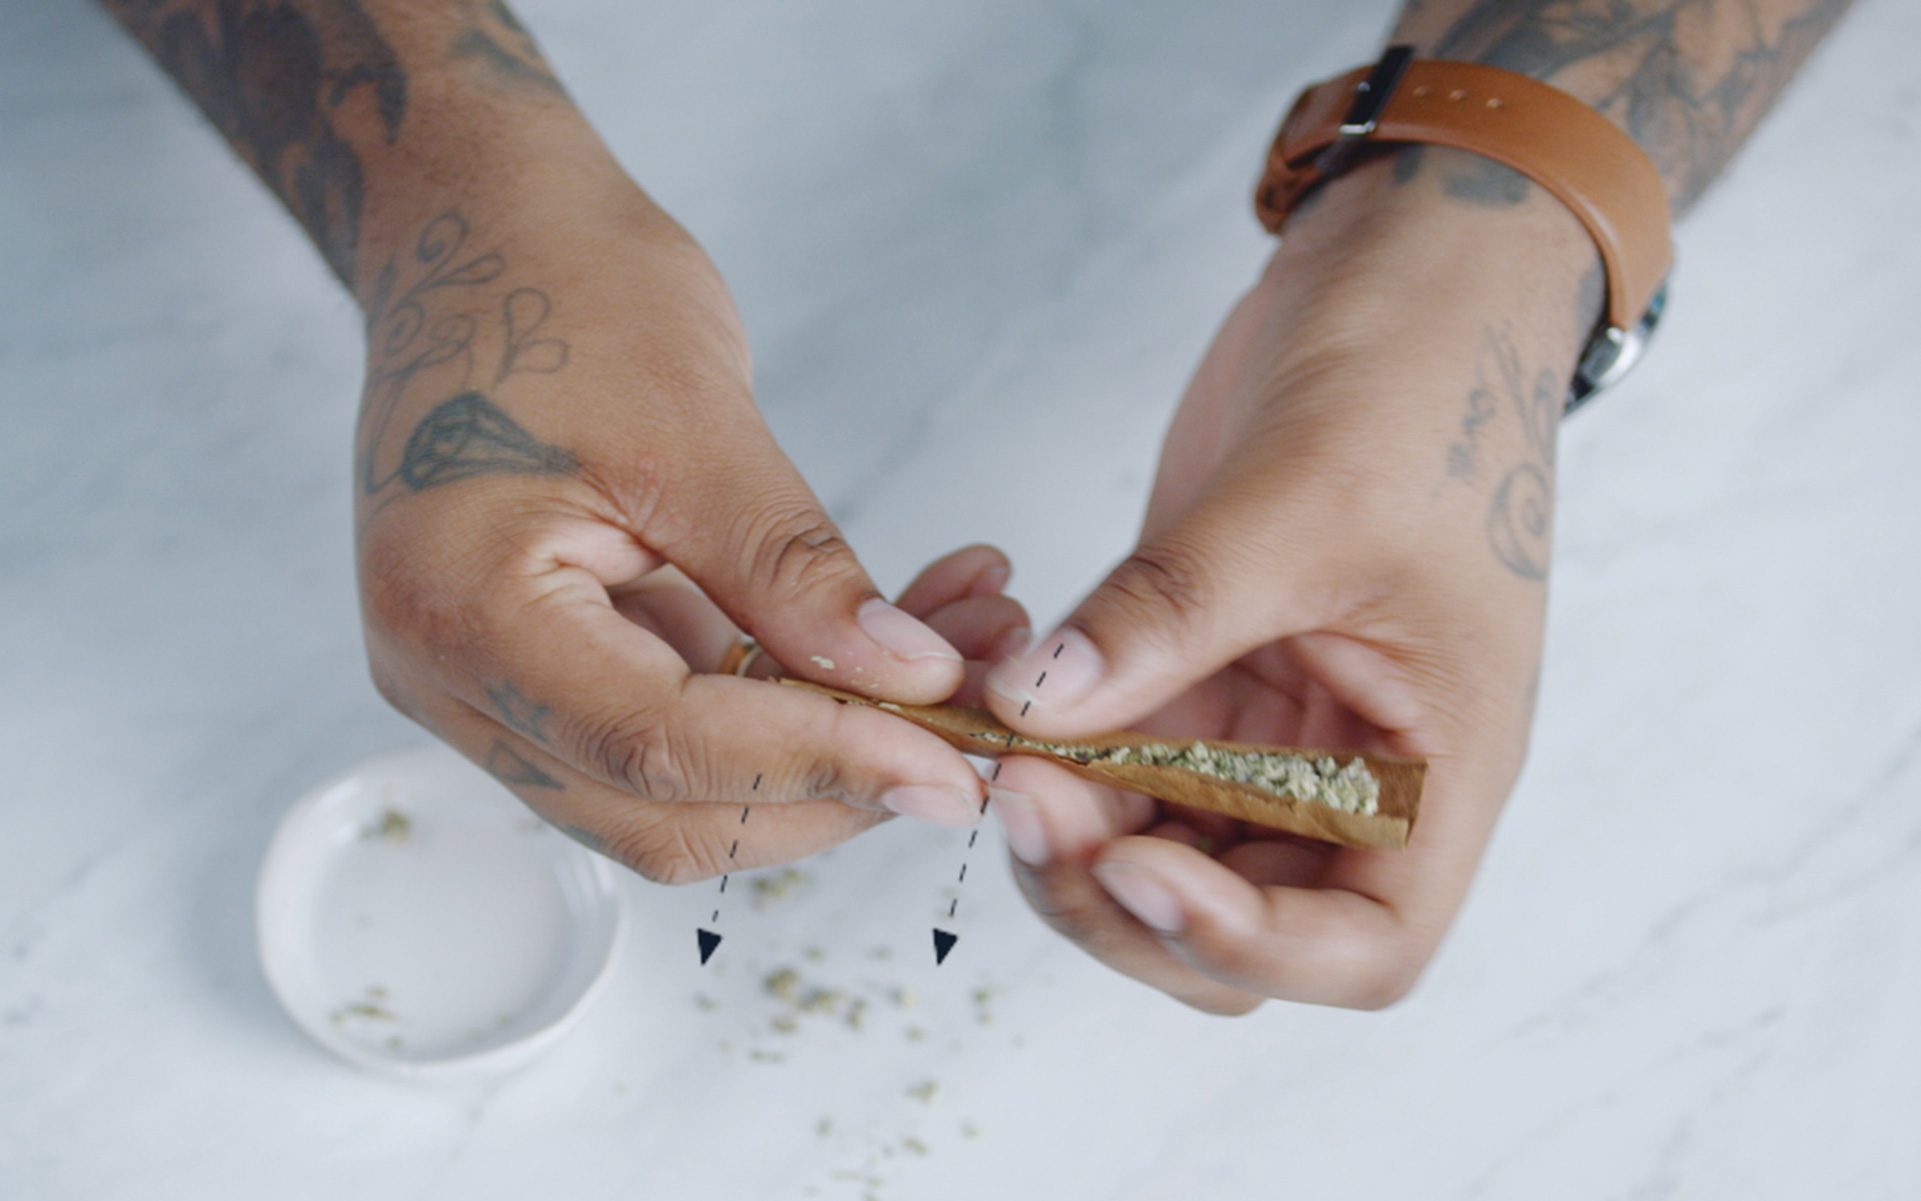 How to roll a blunt in 6 easy steps